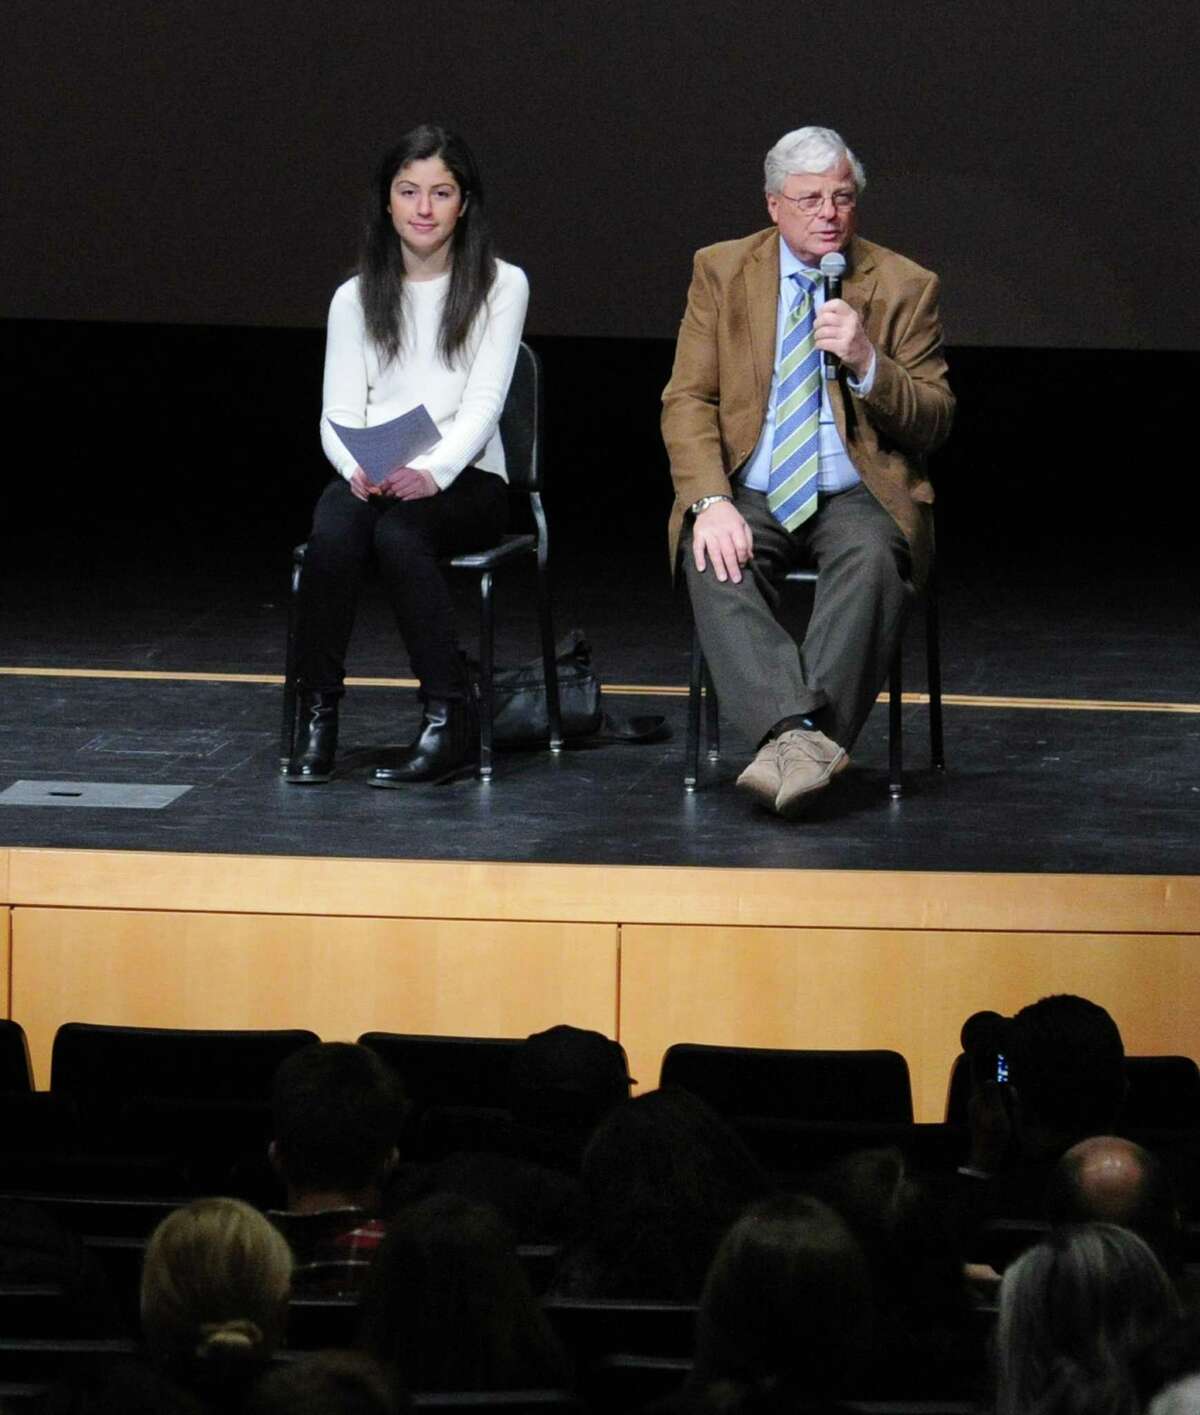 At left, Kathryn Pappas, a Greenwich High School junior, and Interim Superintendent of the Greenwich Public Schools, Sal Corda, were part of the panel during the Greenwich Alliance for Education sponsored screening and panel discussion of the documentary film "Screenagers: Growing Up in the Digital Age," at Greenwich High School, Conn., Tuesday night, Feb. 8, 2017.